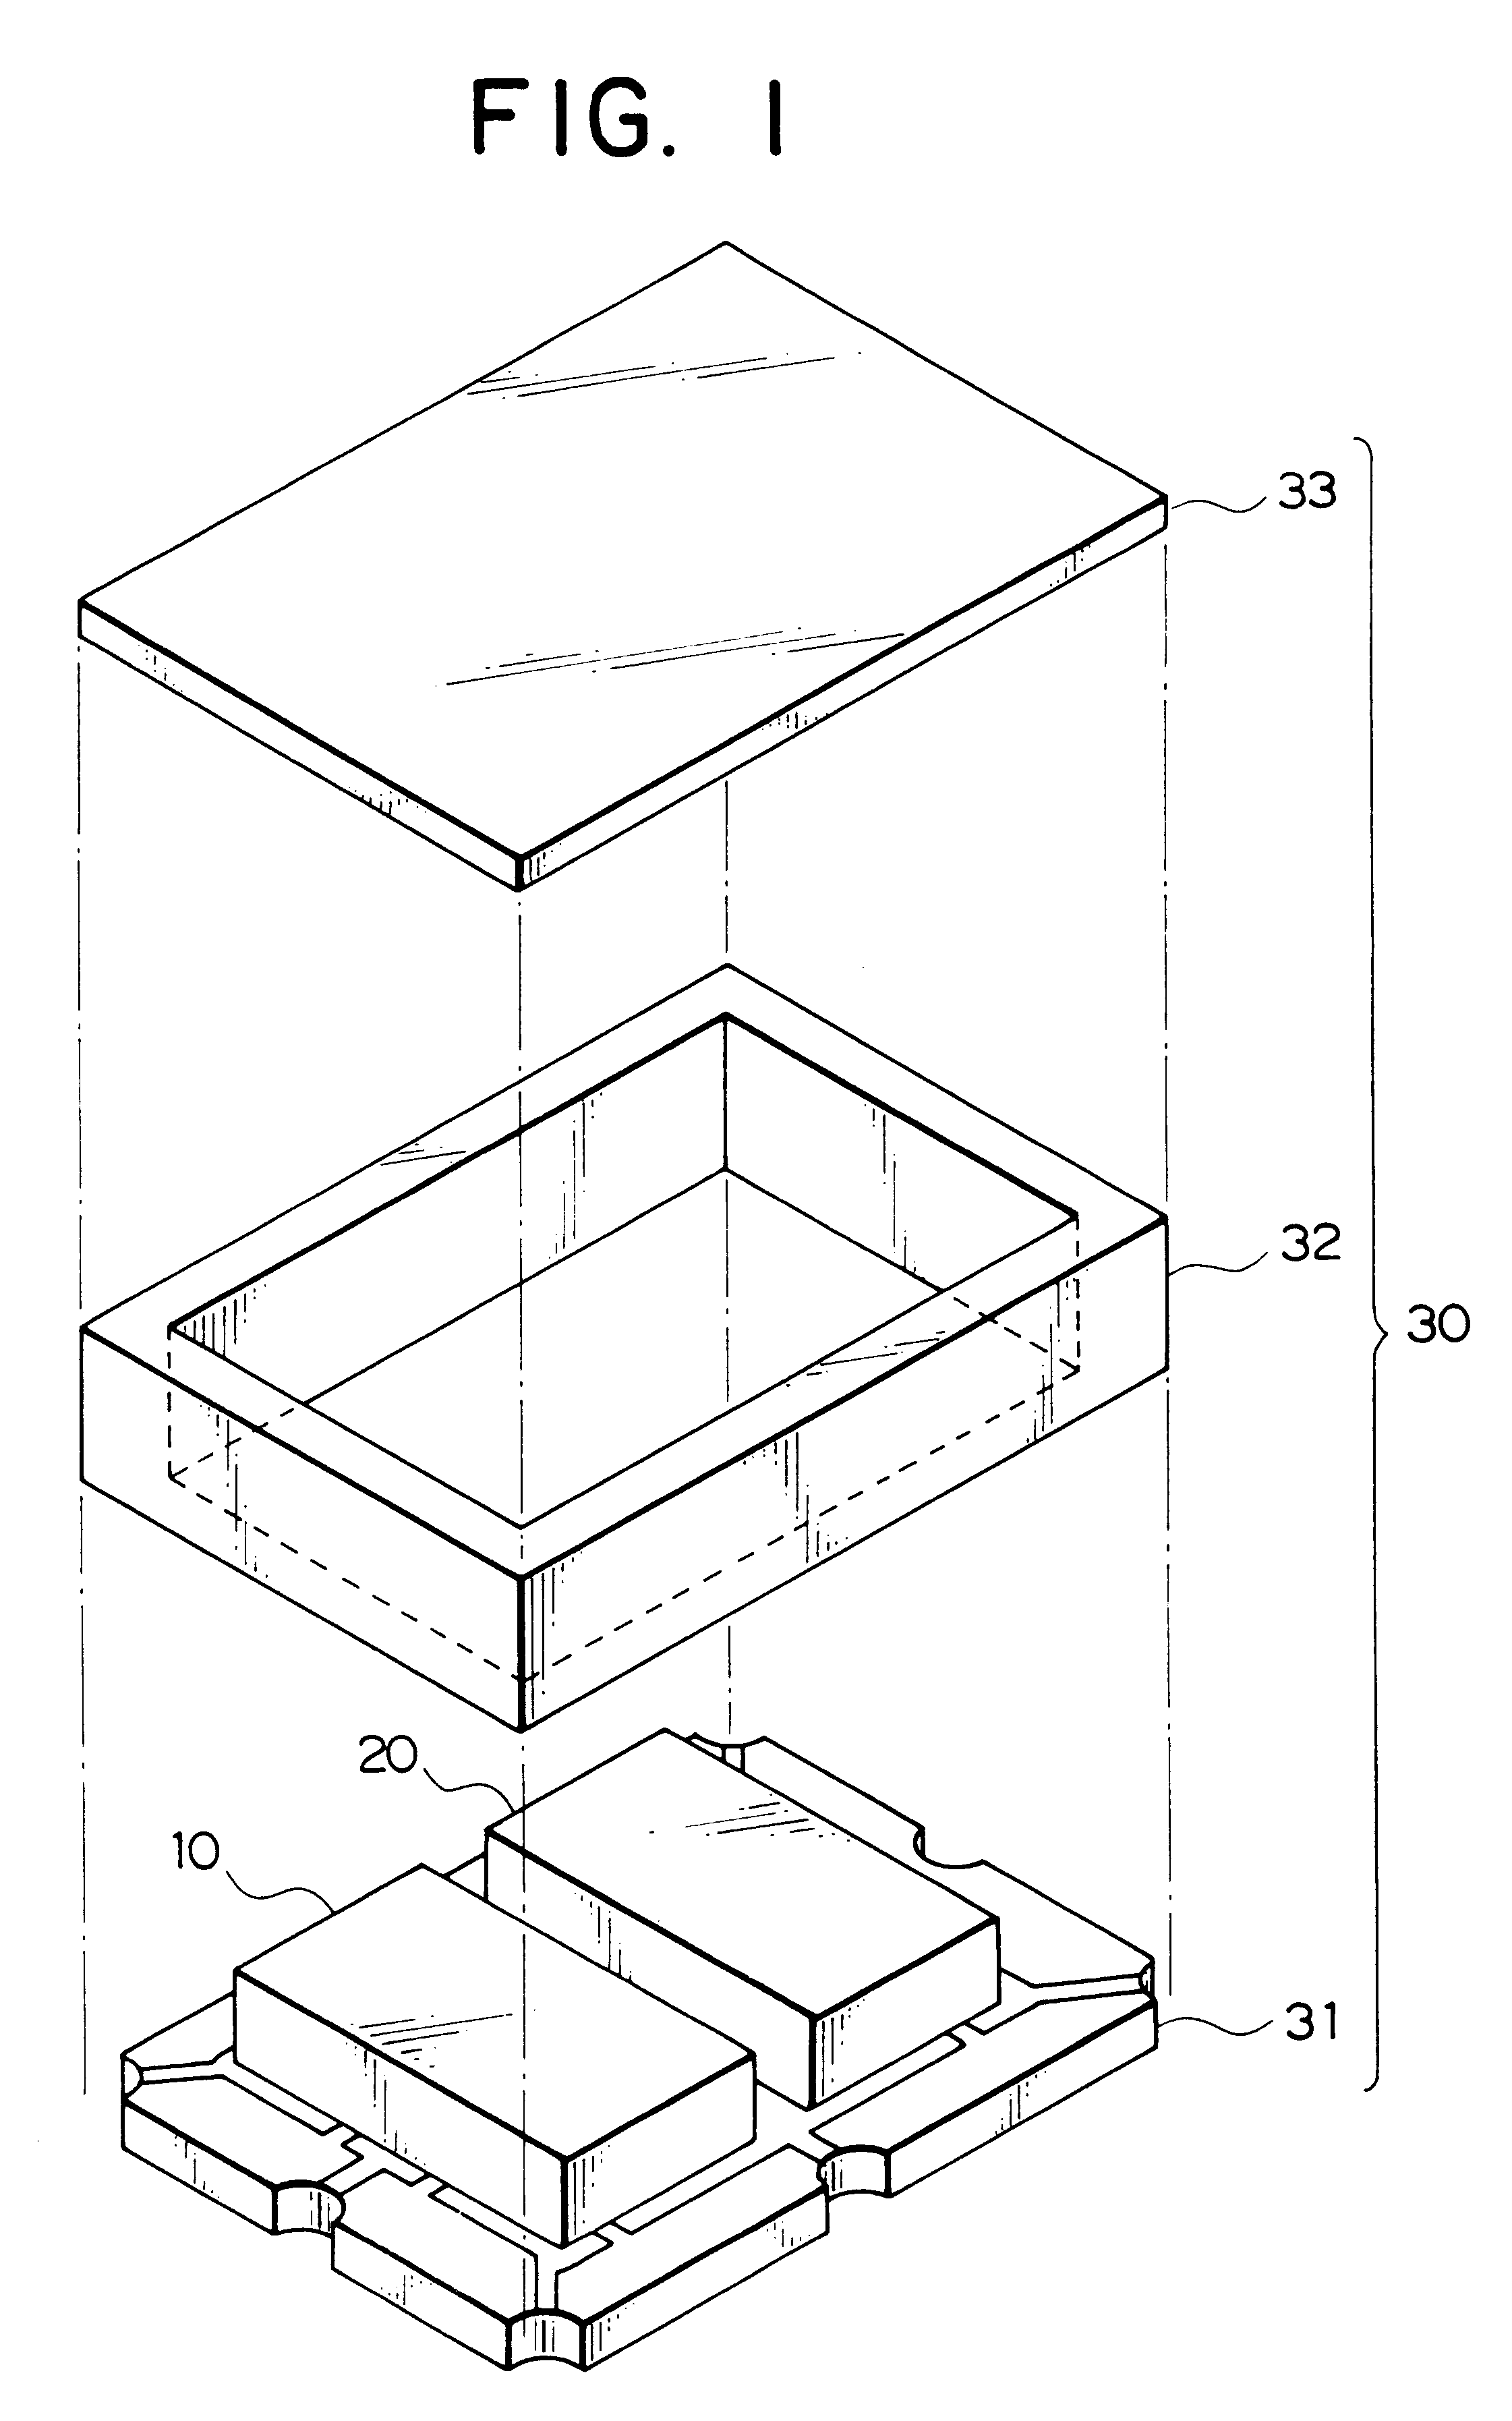 Surface acoustic wave device comprising first and second chips face down bonded to a common package ground